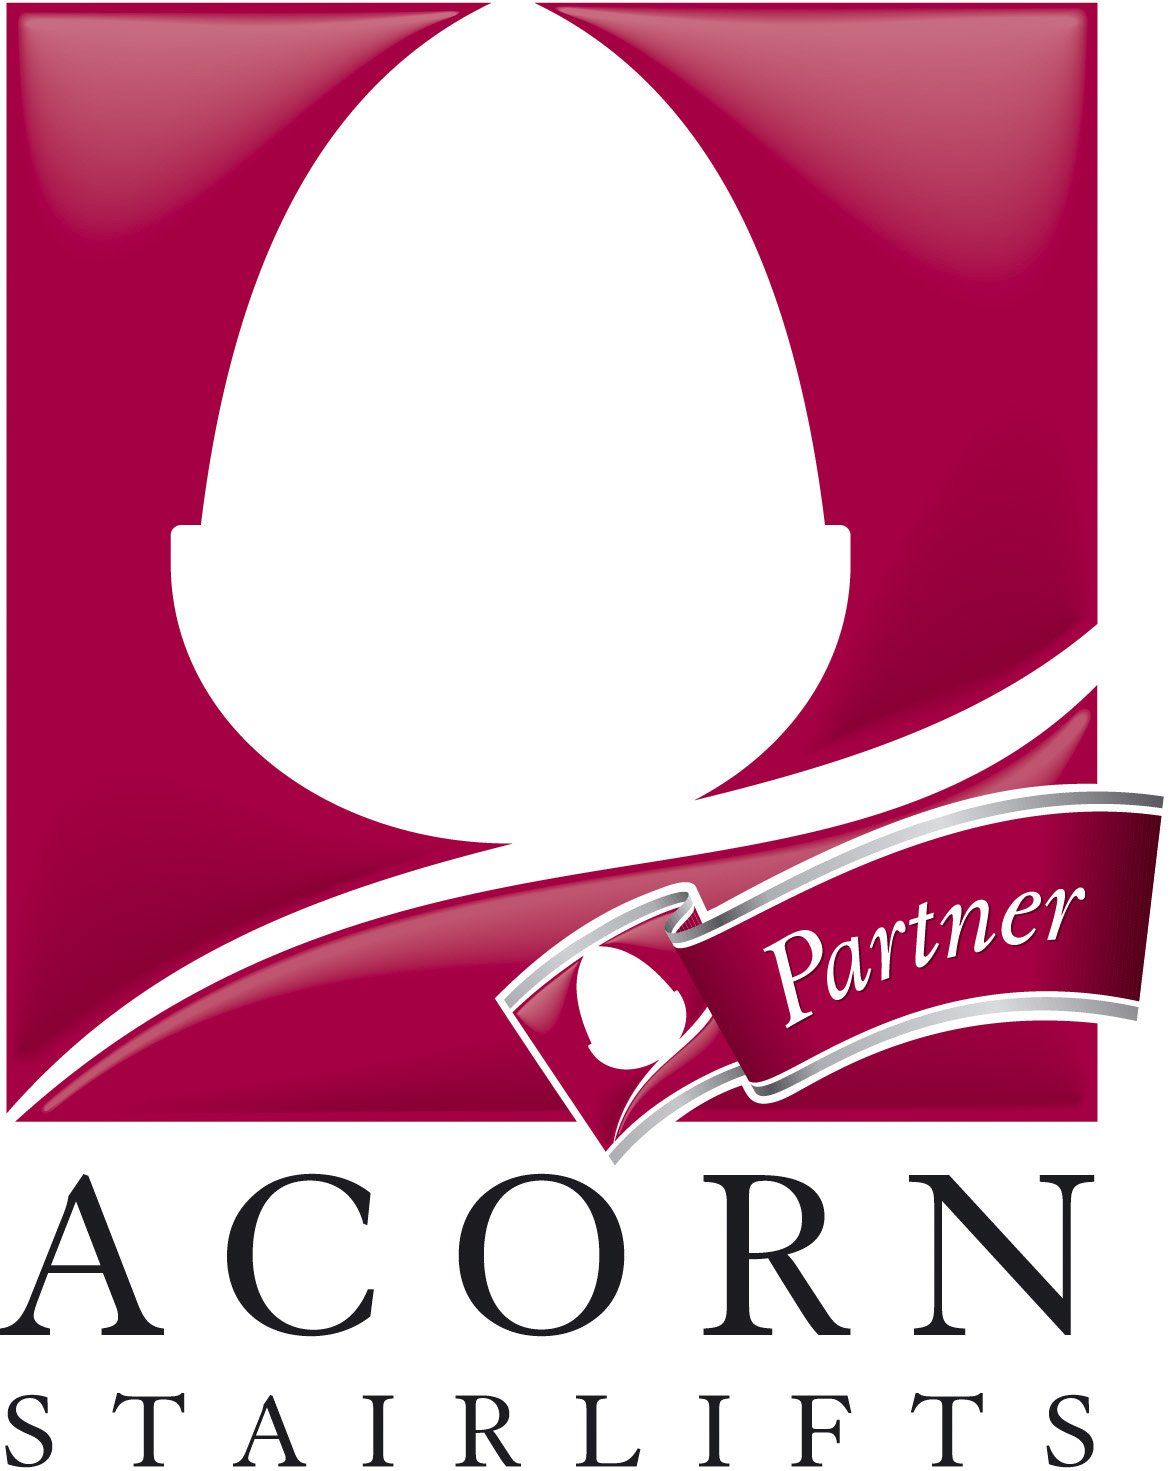 Acorn Stairlifts Merseyside - Helping Hand Stairlifts